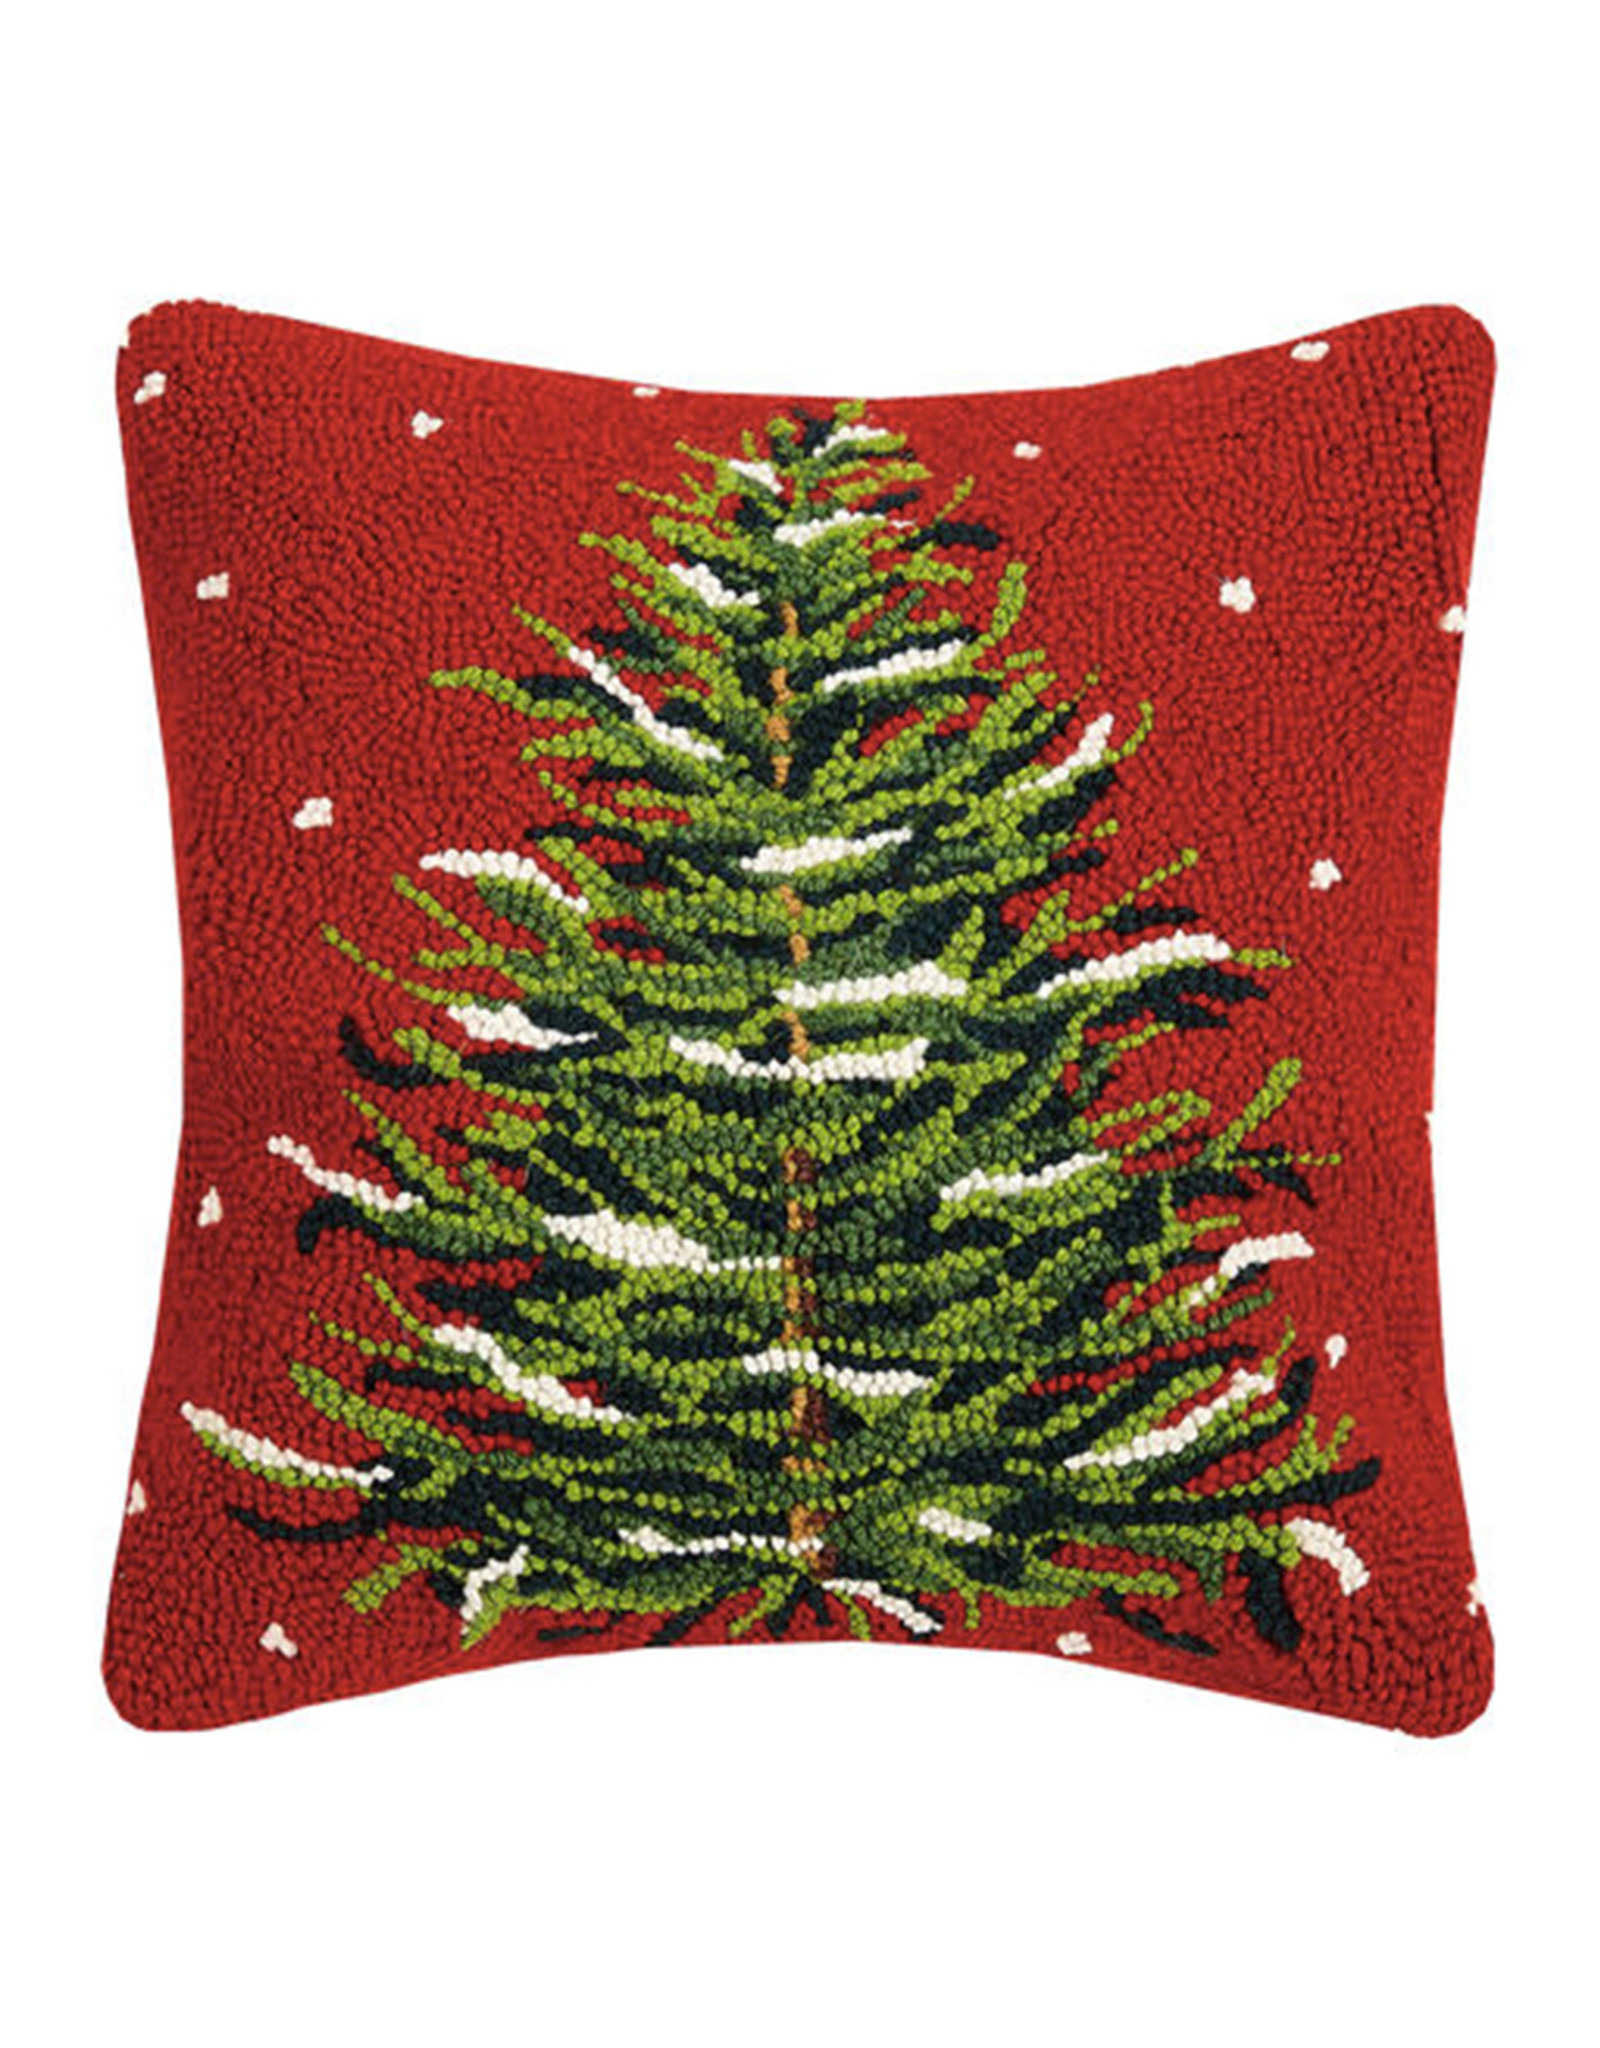 Christmas Tree Hook Pillow - 16" x 16" - Red